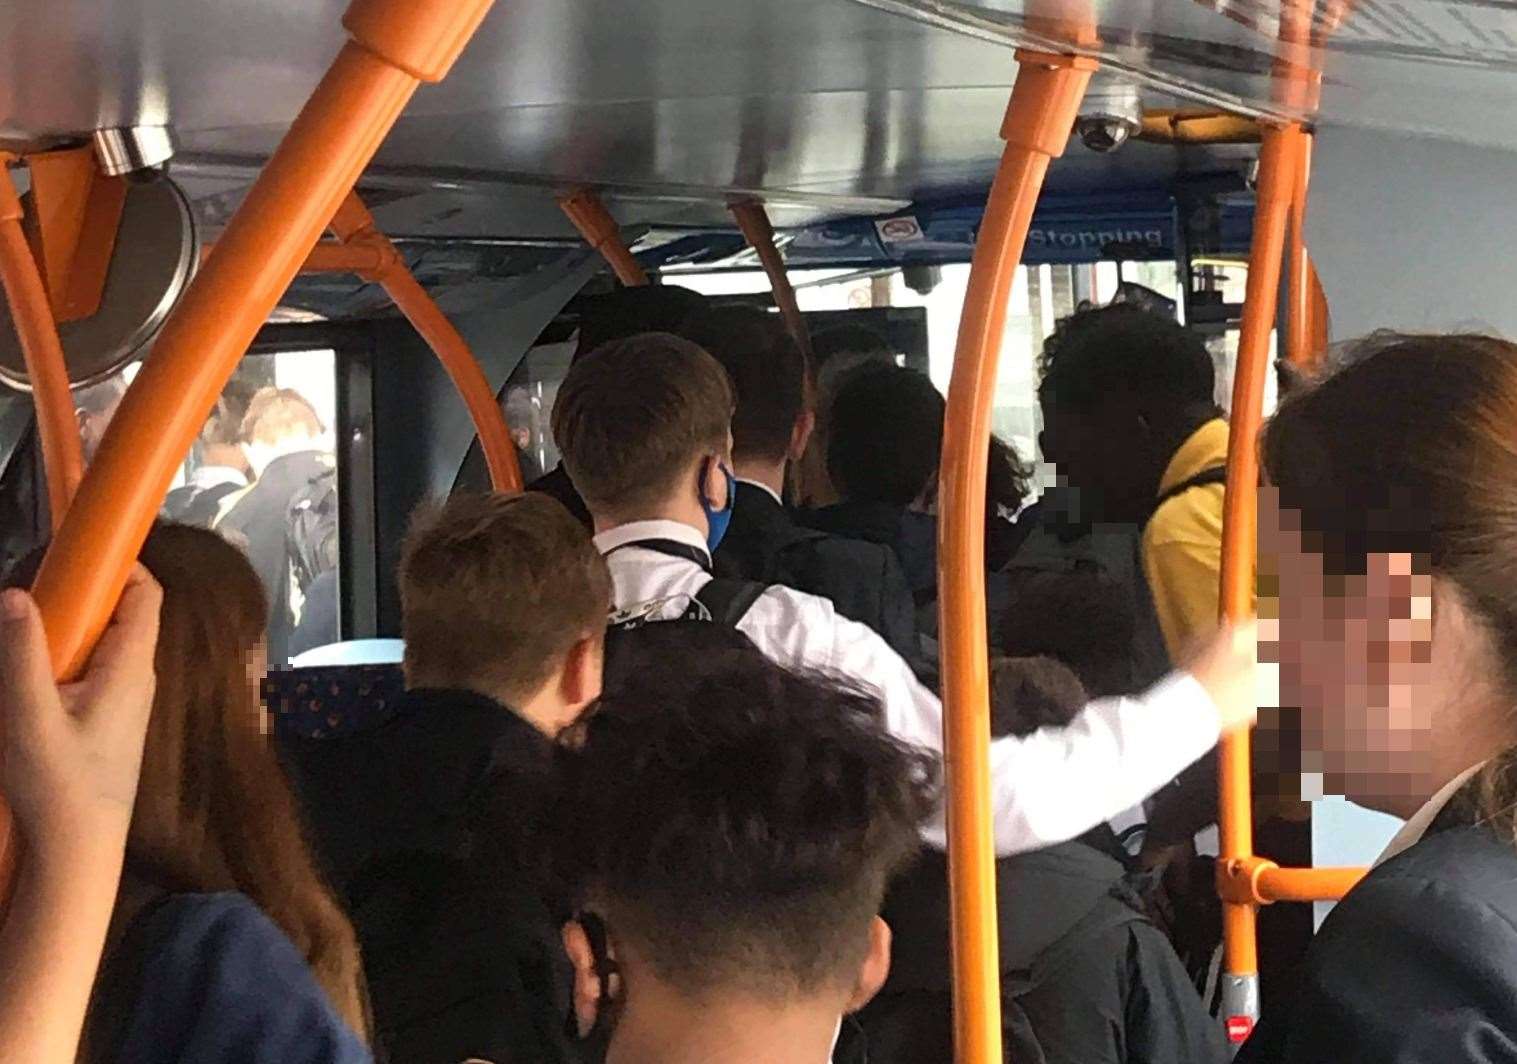 School pupils from Canterbury crowding to leave the bus in the afternoon